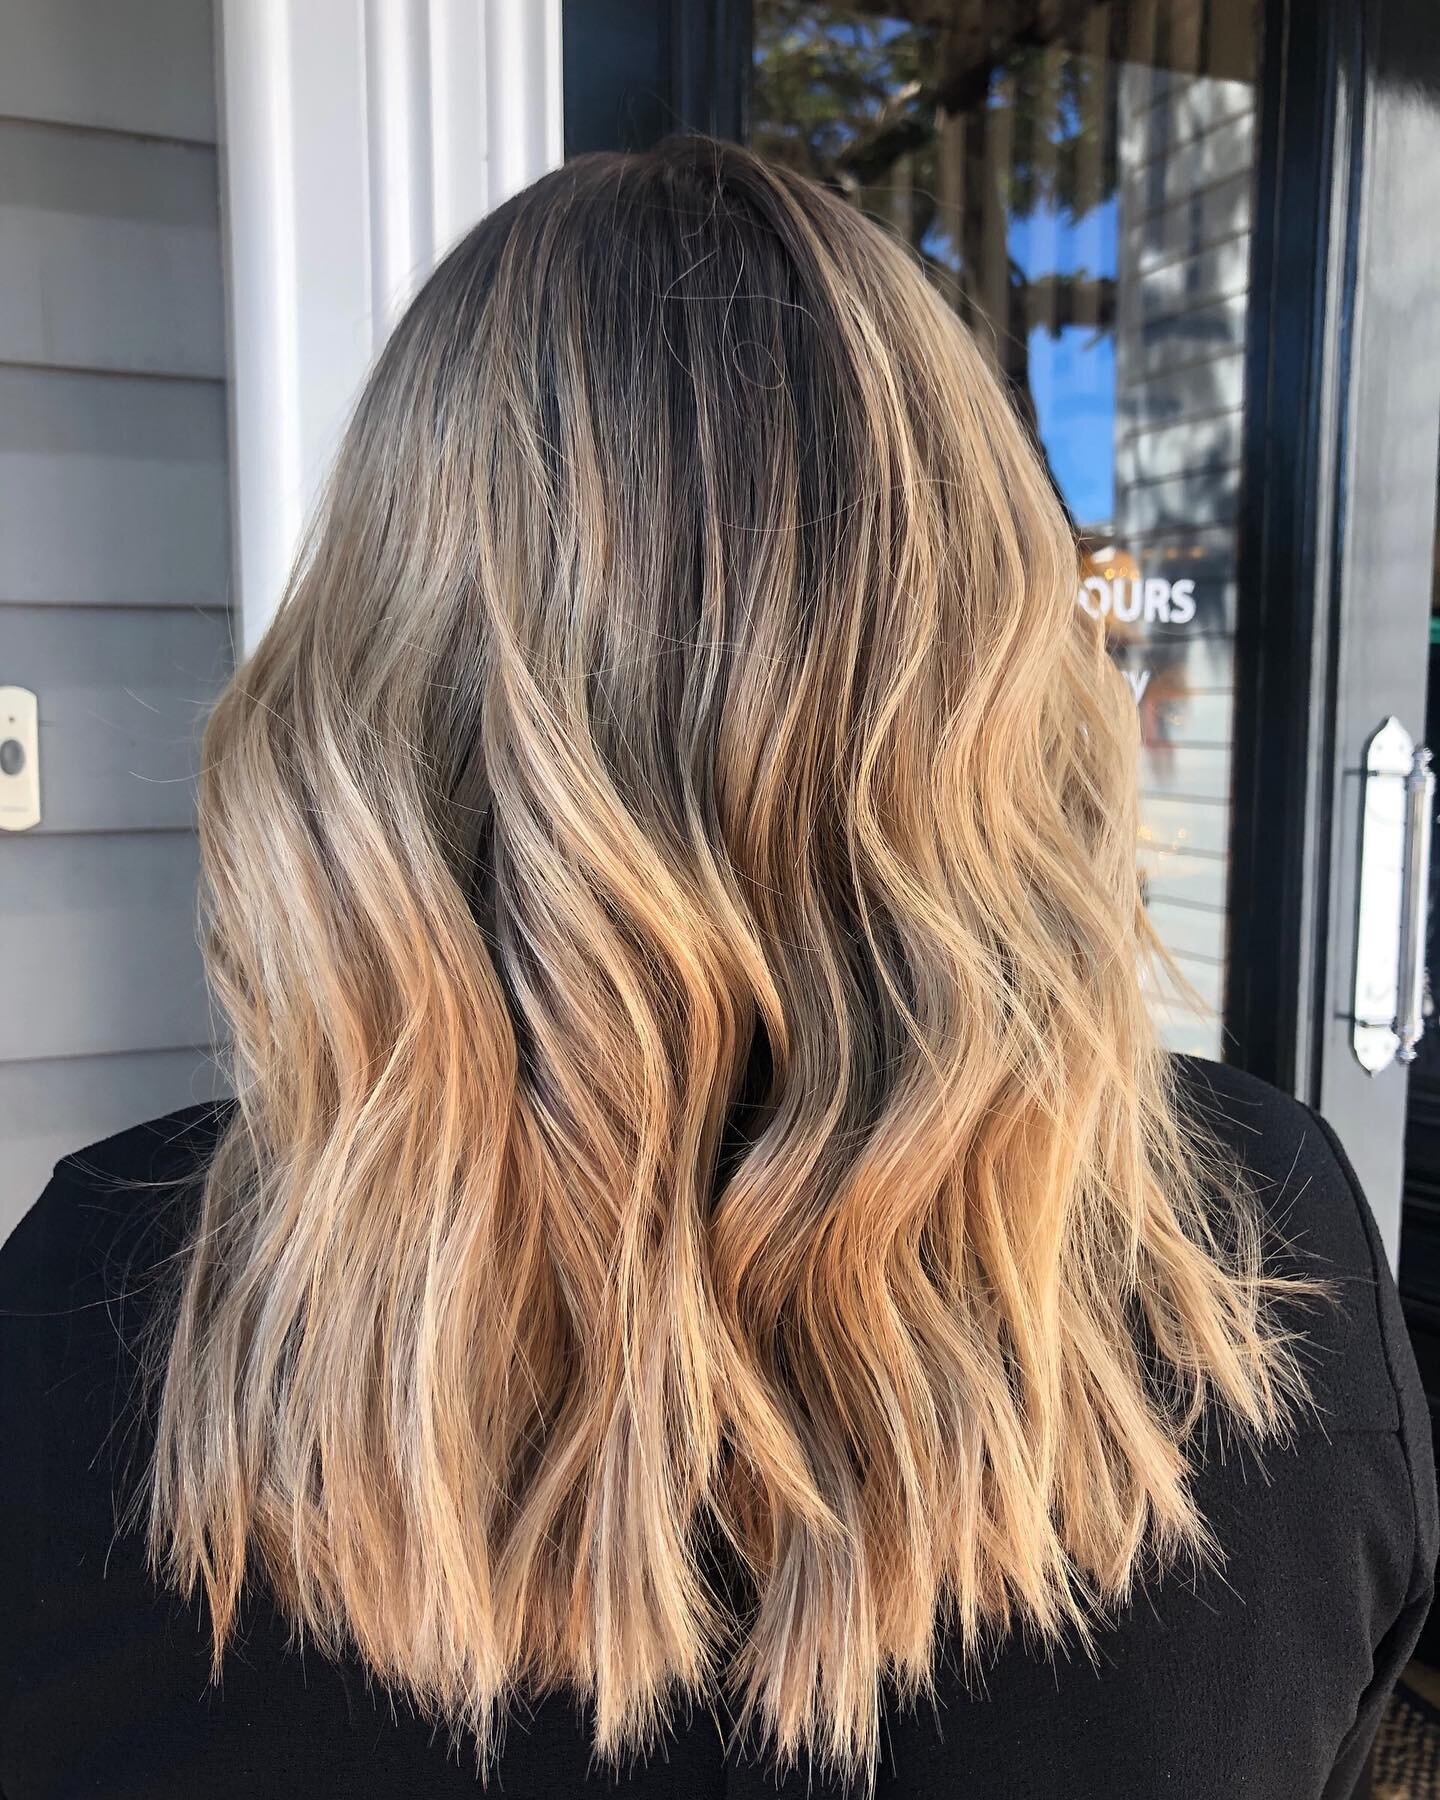 Are you wanting to transition away from regular foils? 
⠀⠀⠀⠀⠀⠀⠀⠀⠀
We recommend the reverse balayage technique, which involves adding in the depth at the root while keeping all the blonde on your ends. Thus leaving you with a seamless lived in look. ✨